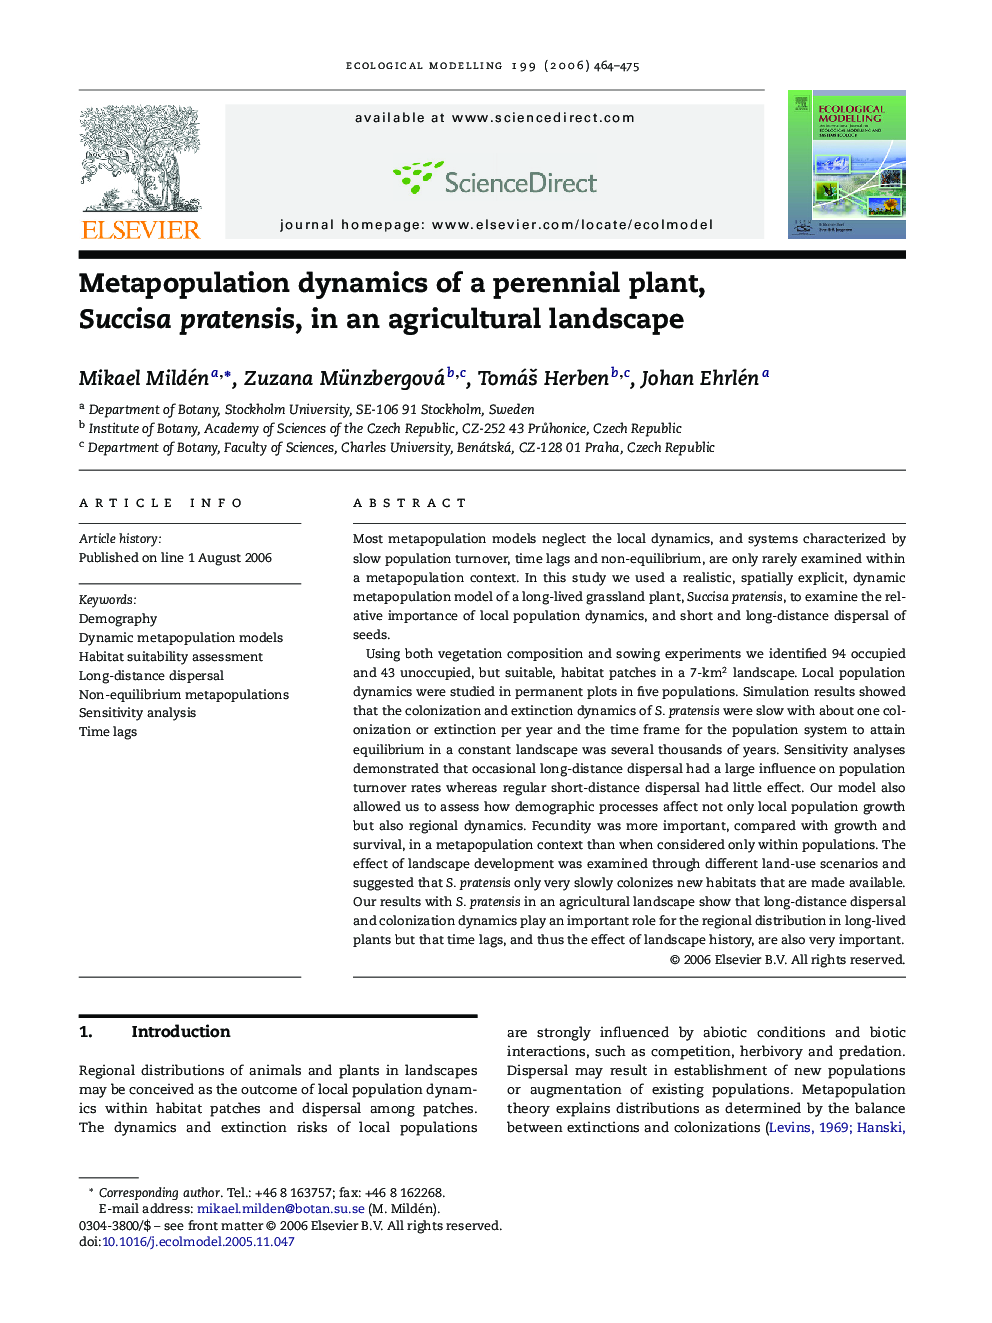 Metapopulation dynamics of a perennial plant, Succisa pratensis, in an agricultural landscape